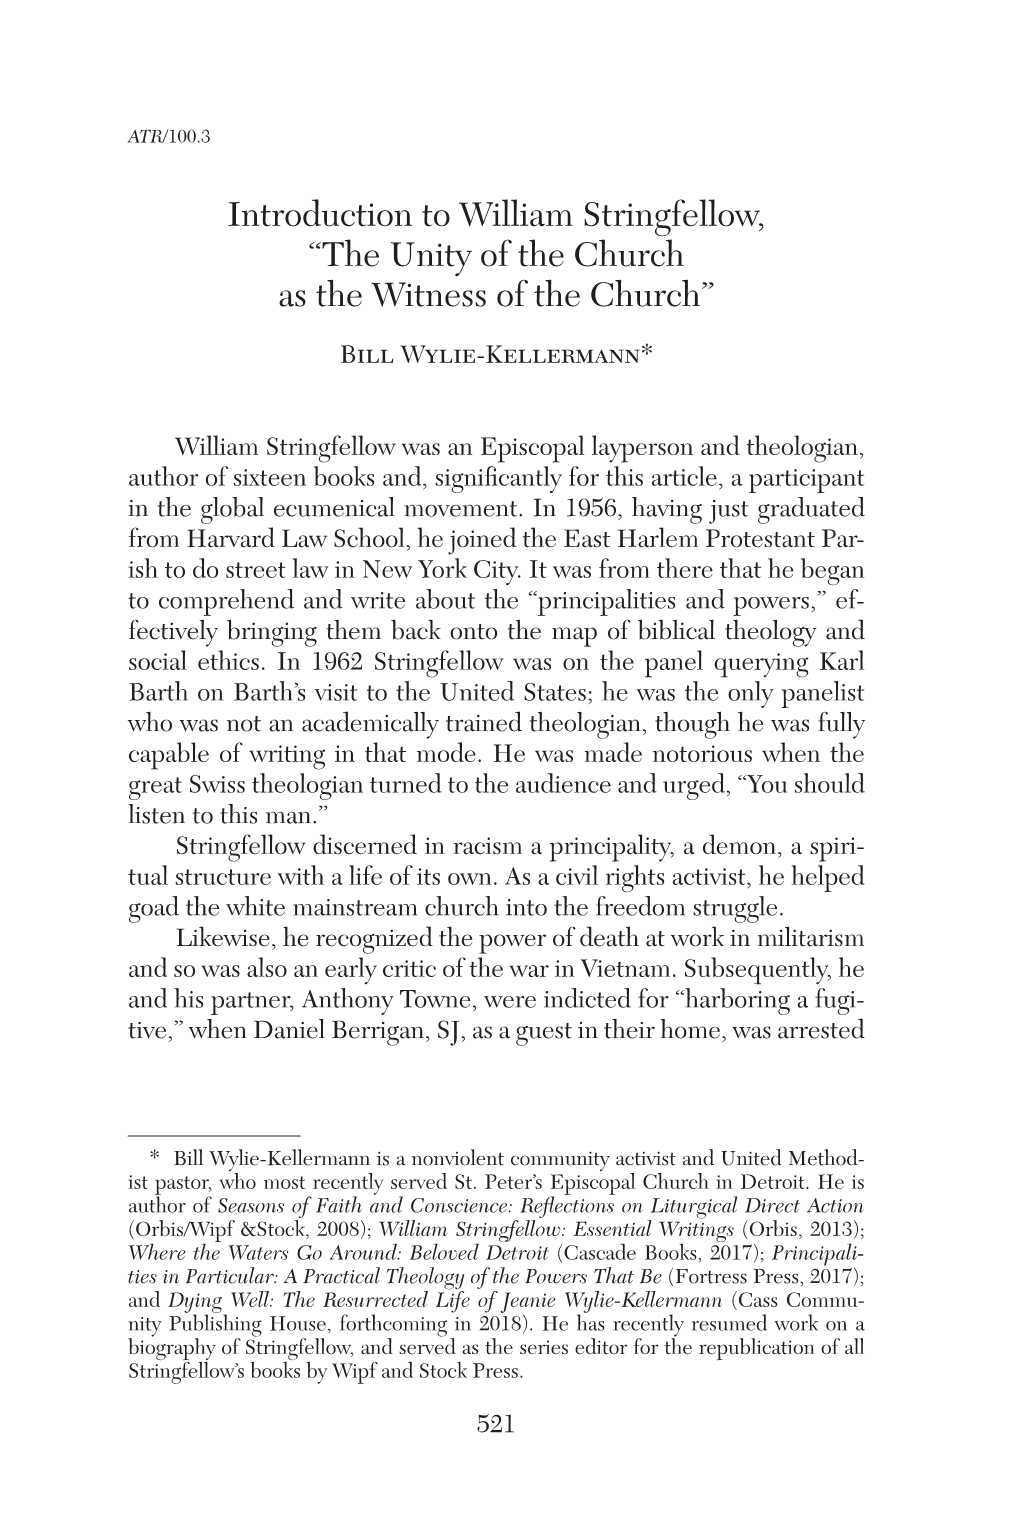 Introduction to William Stringfellow, “The Unity of the Church As the Witness of the Church”